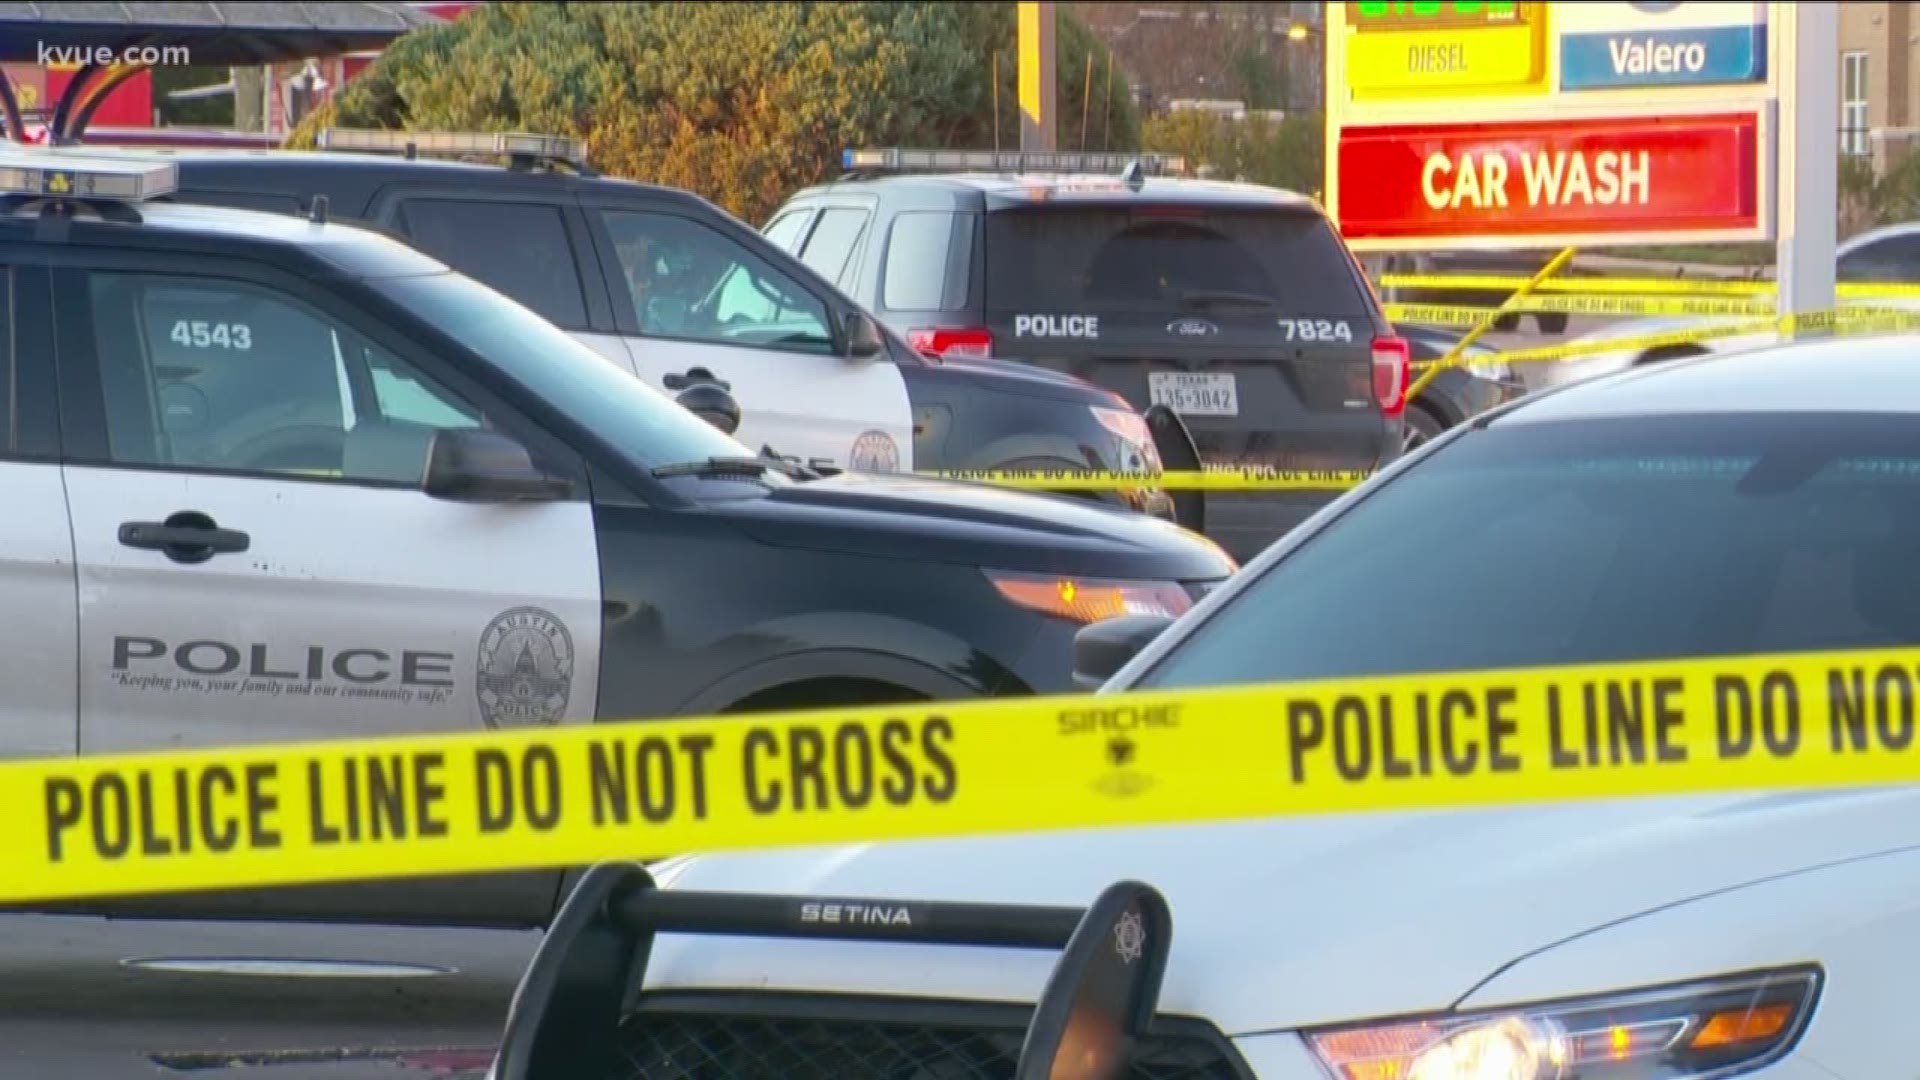 On Friday morning, a man shot his estranged wife at a gas station and then turned the gun on himself. When officers arrived on the scene, they did not find a gun.